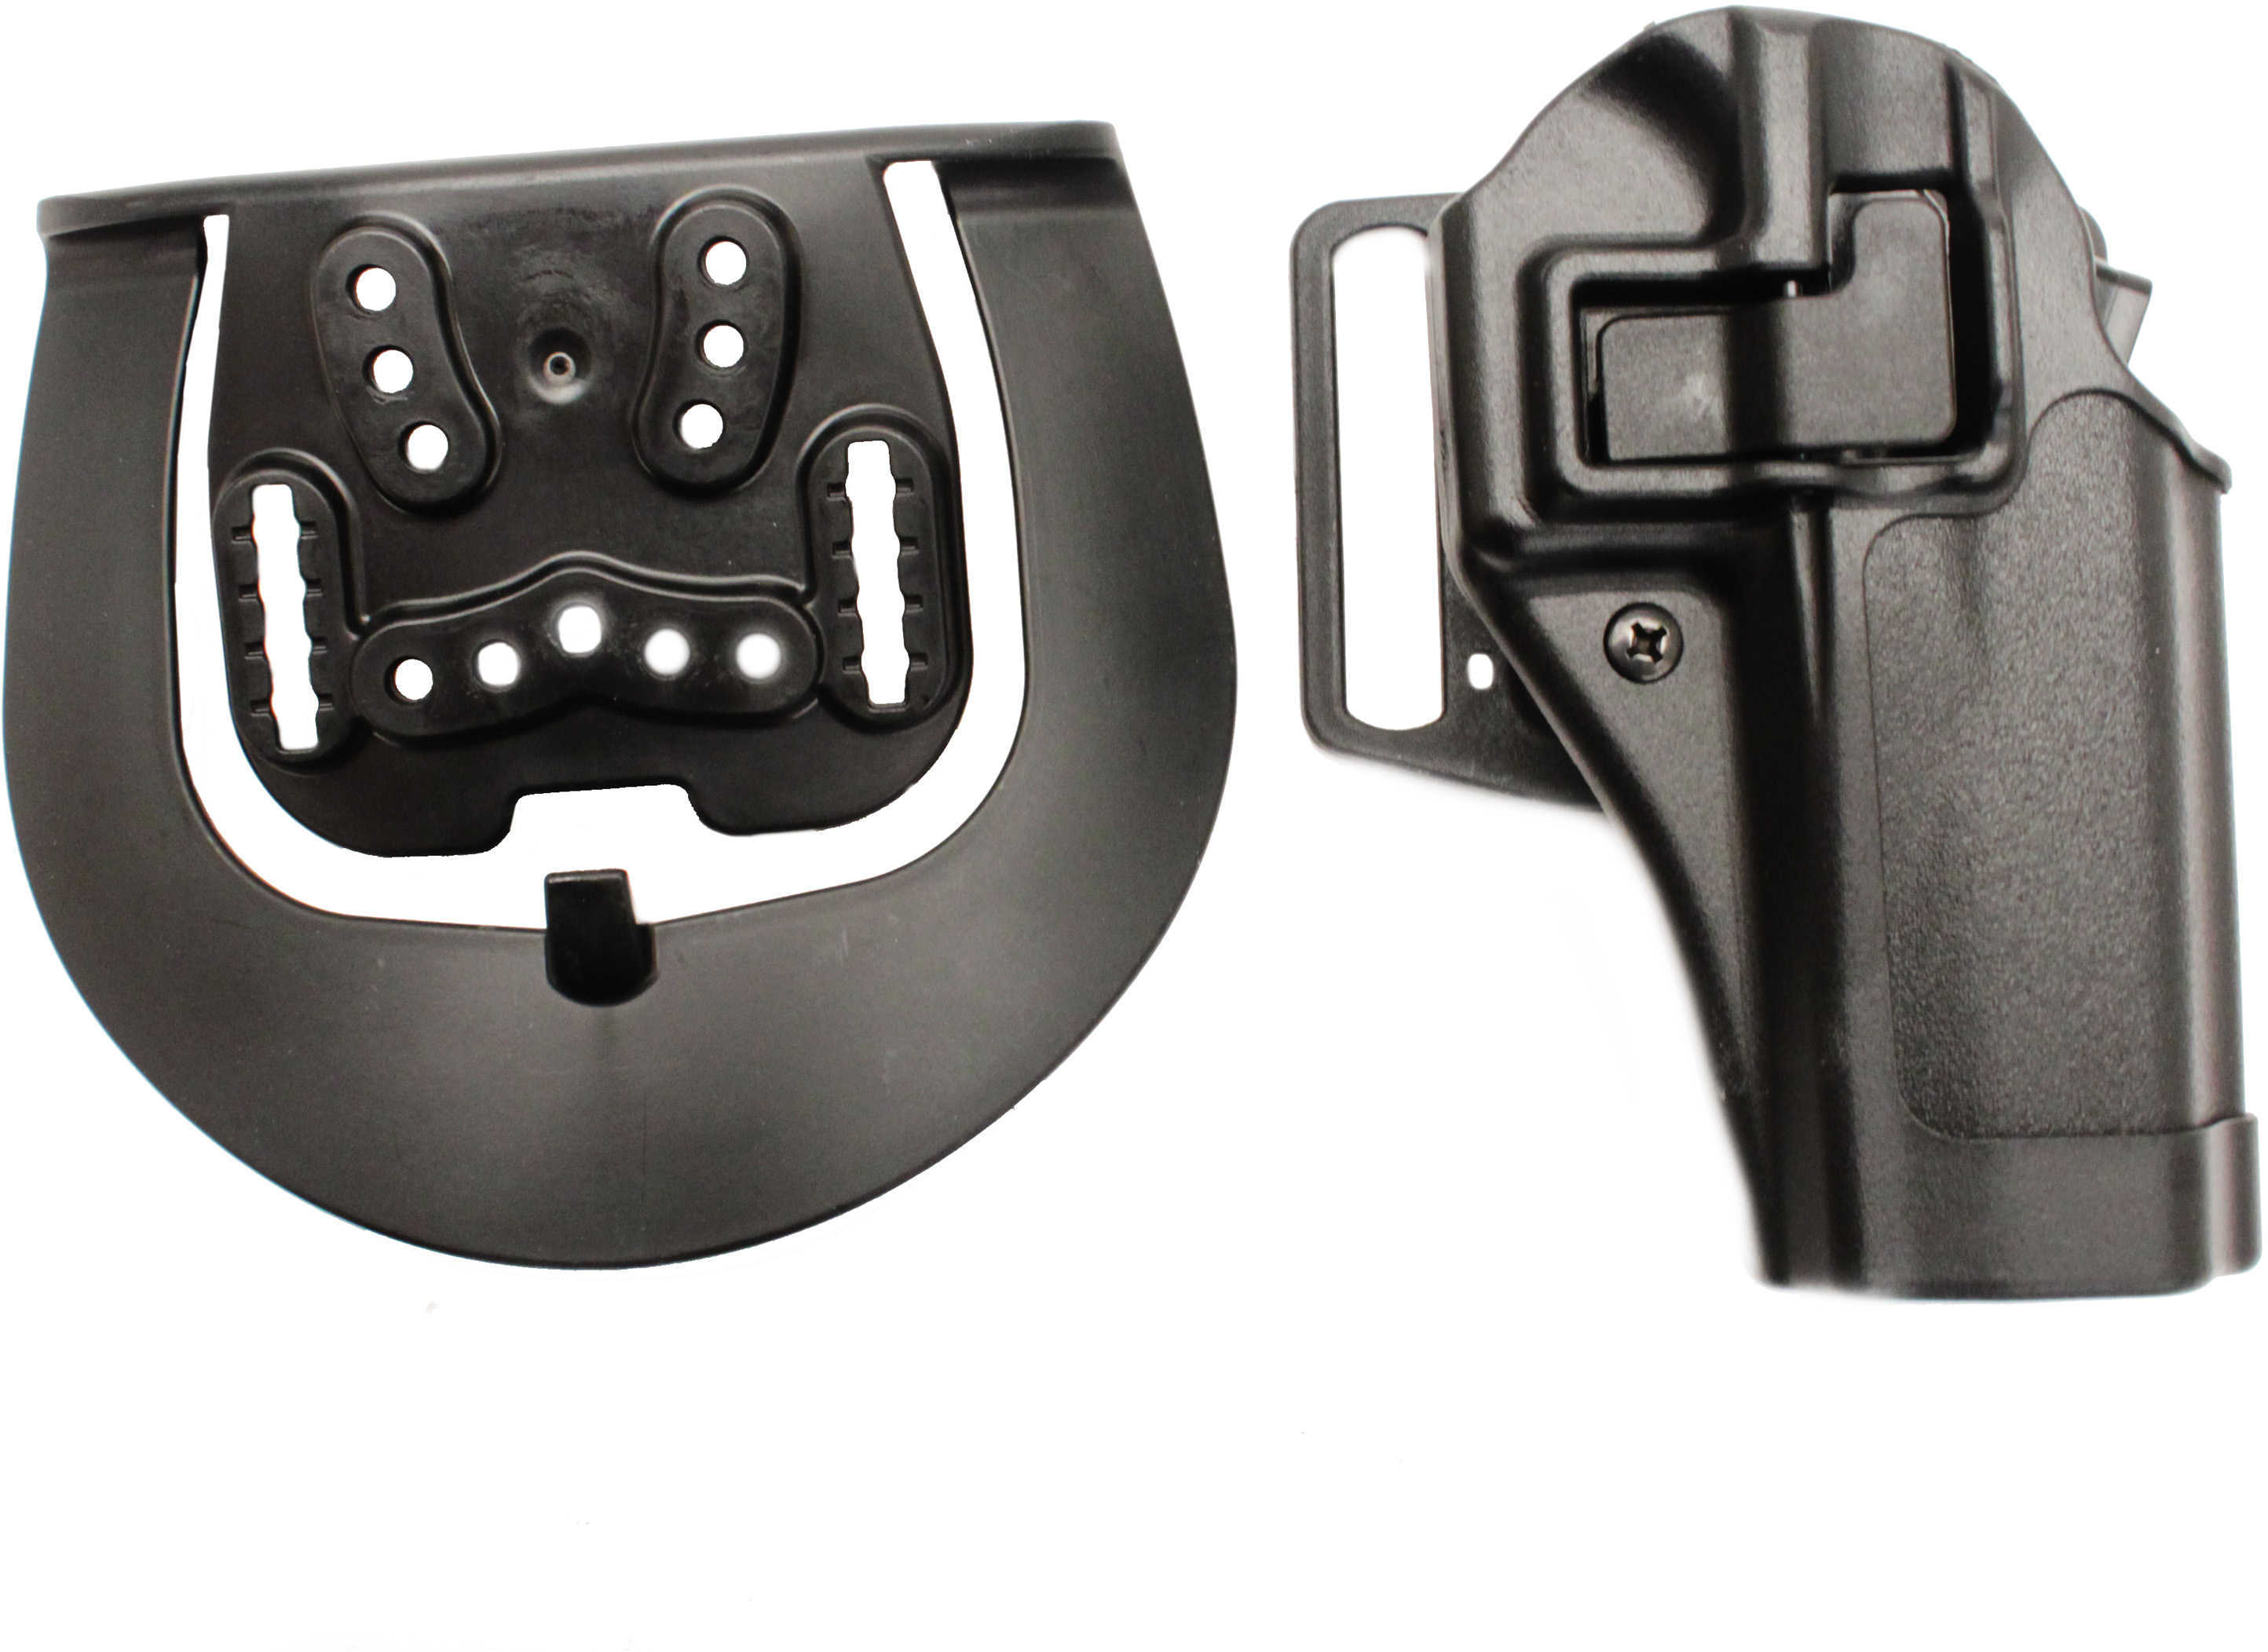 BlackHawk Products Group Serpa CF Belt & Paddle Holster Plain Matte Finish for Glock 20/21 SWMP Right Hand 410513BK-R